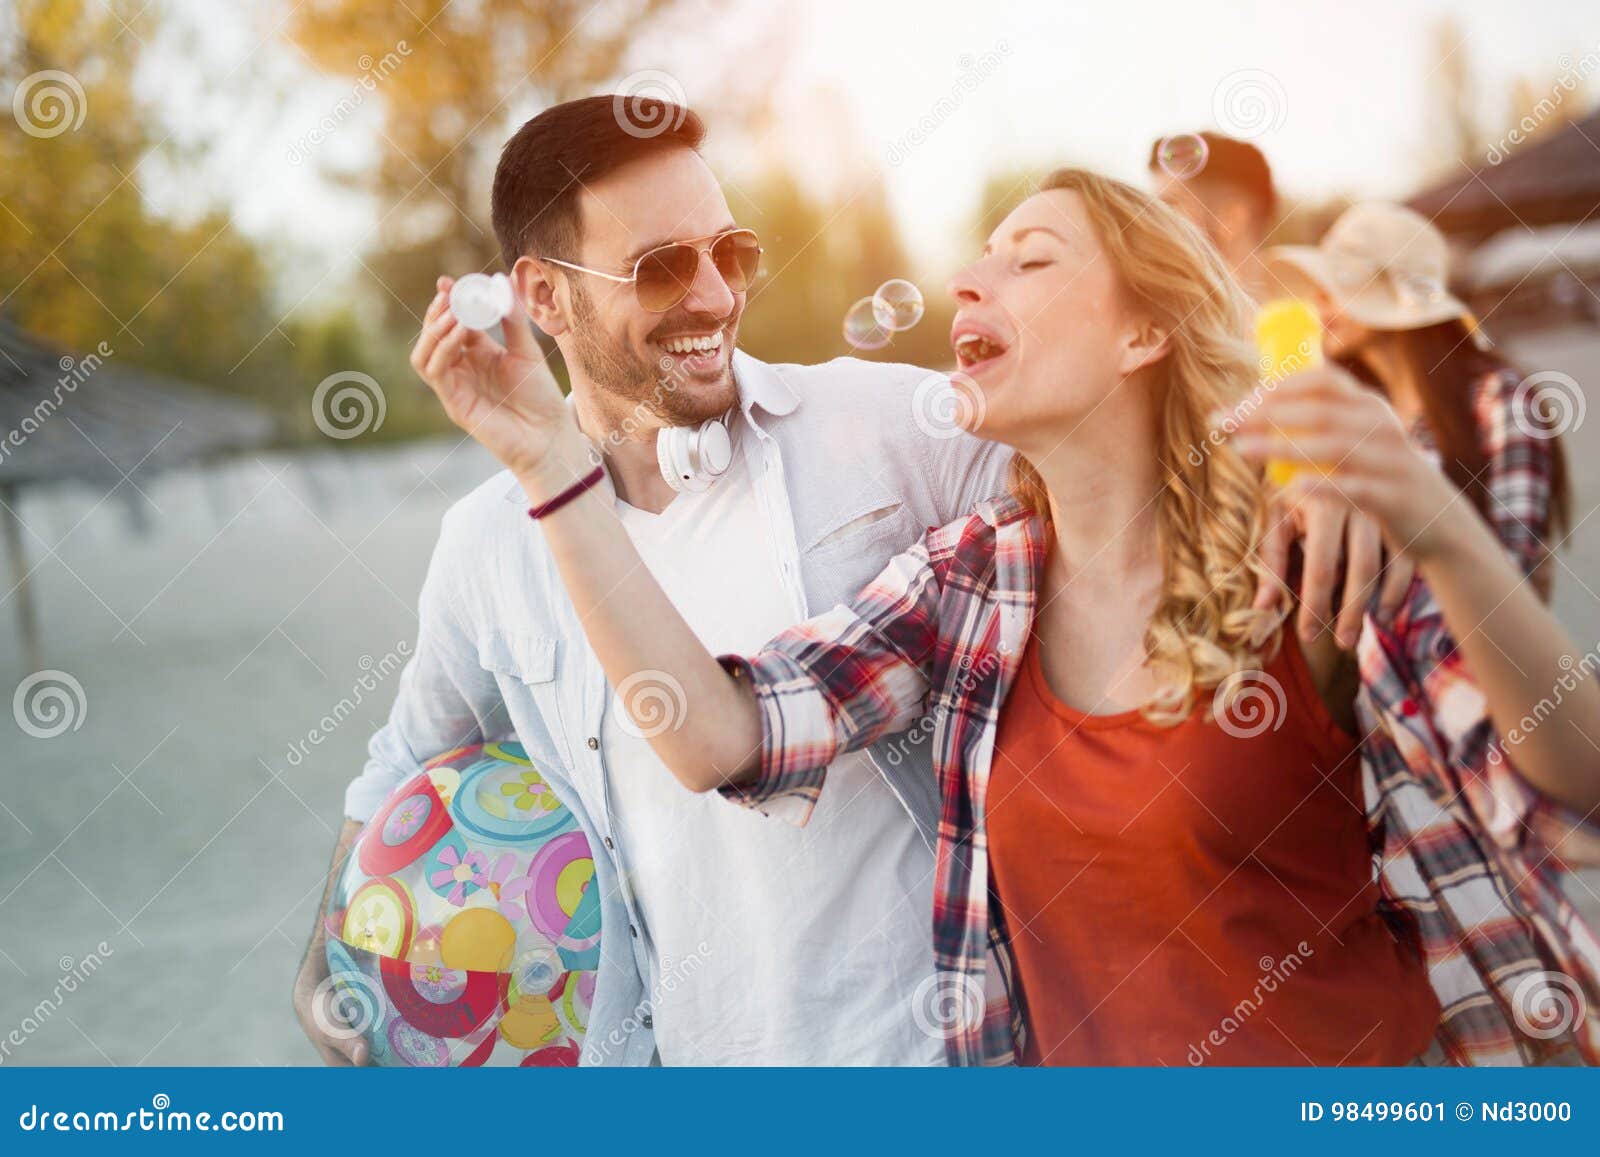 Happy Couple Smiling And Having Fun Time Stock Image Image Of Male